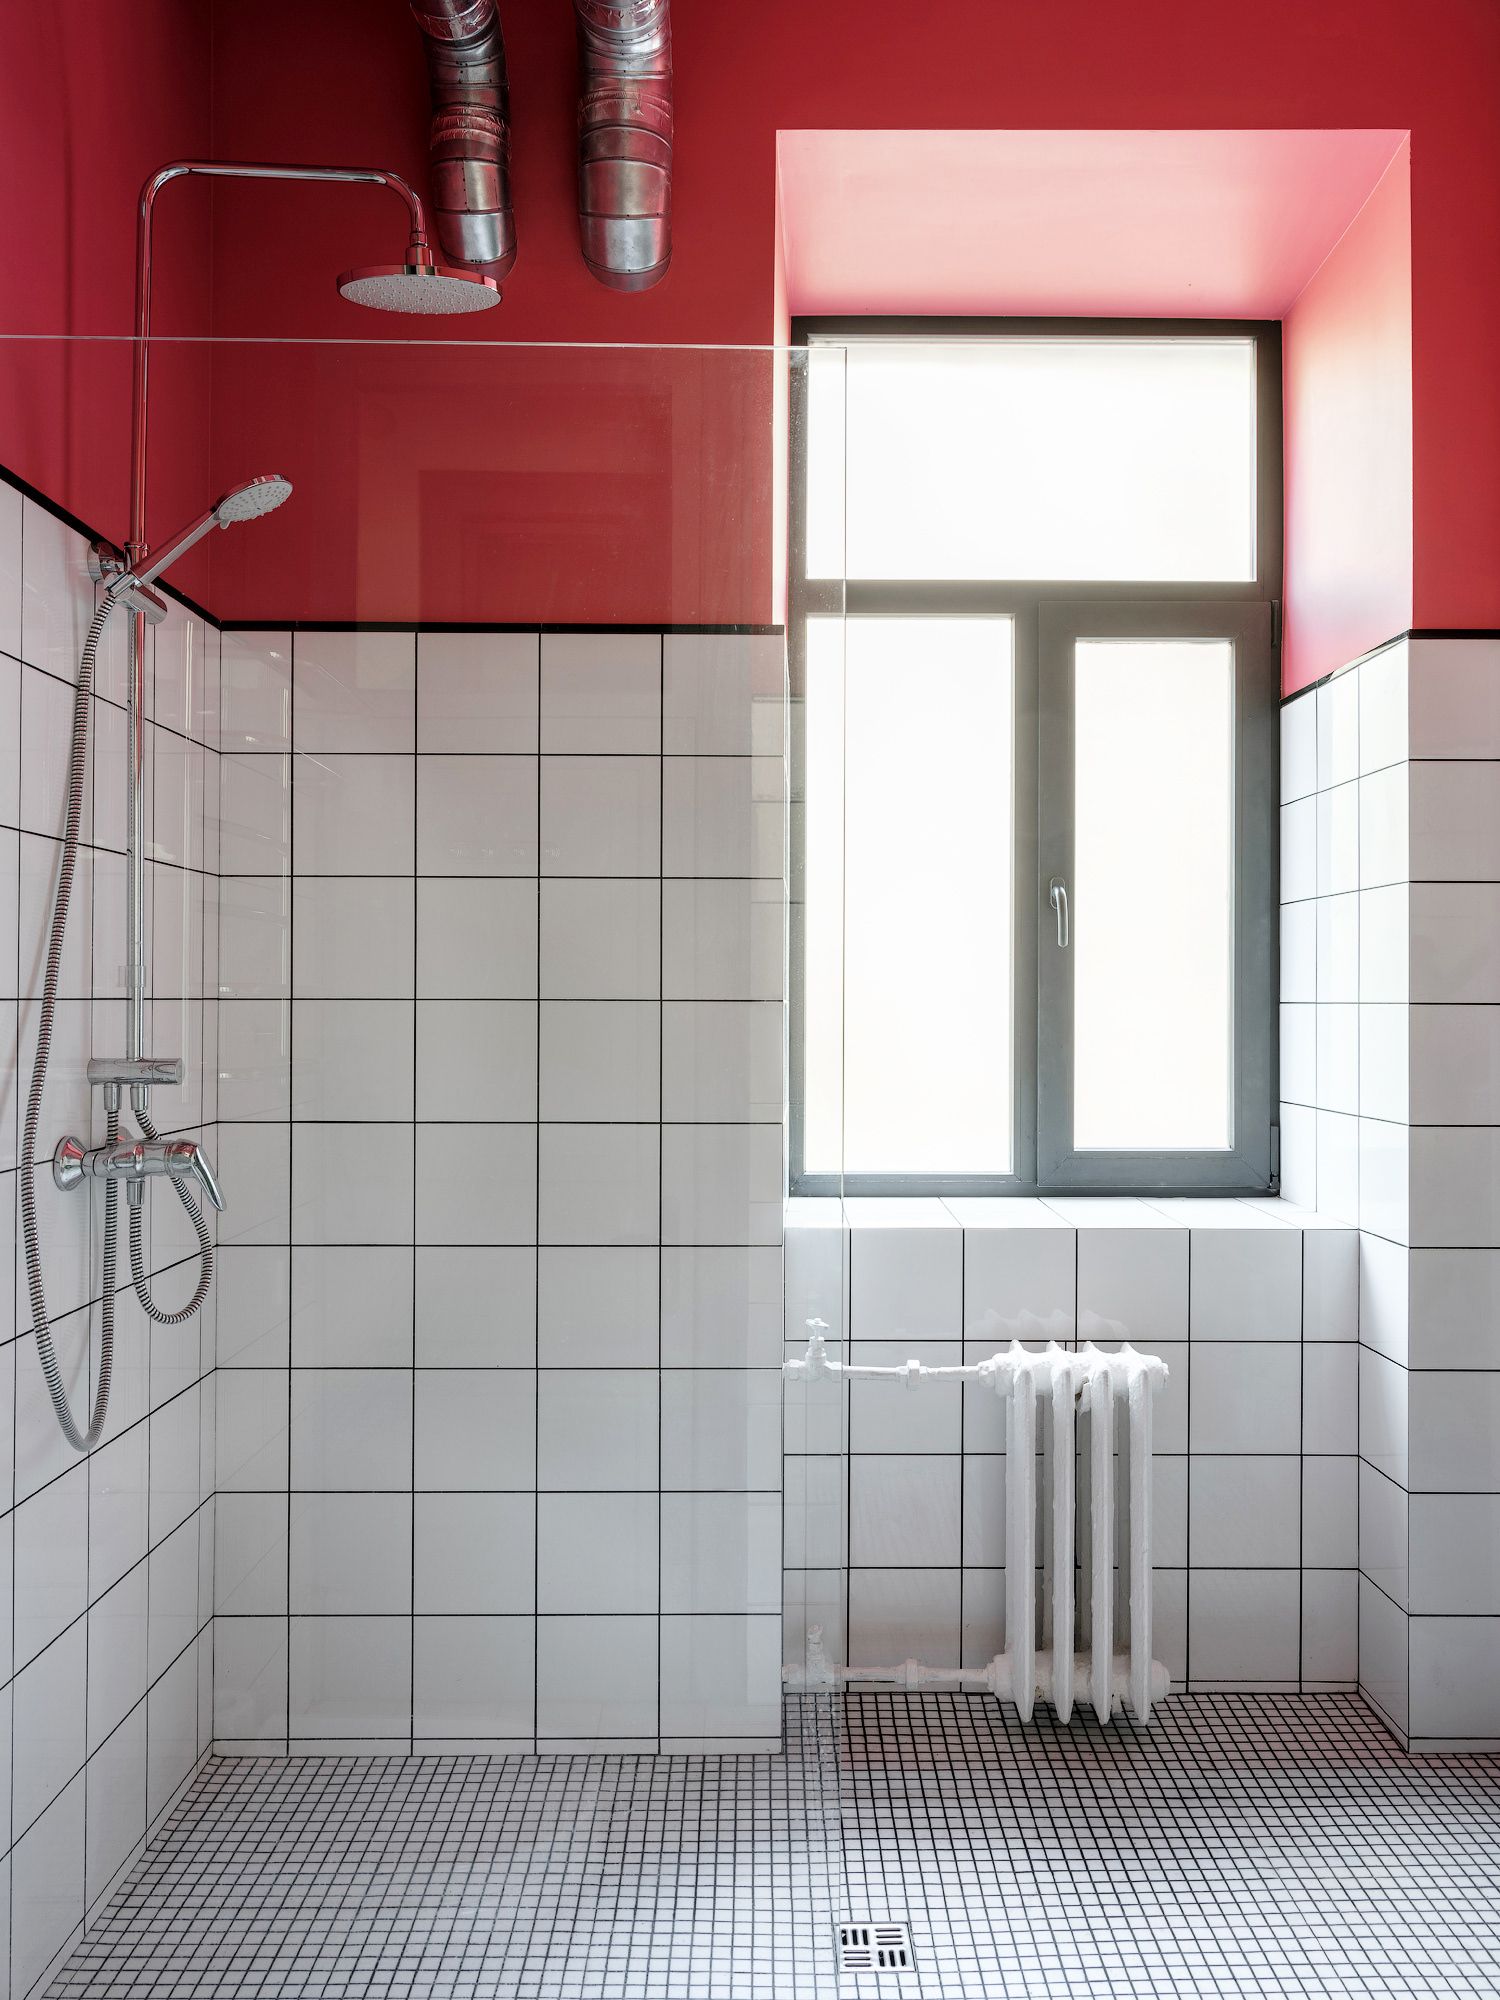 How to decorate a small bathroom and still save space